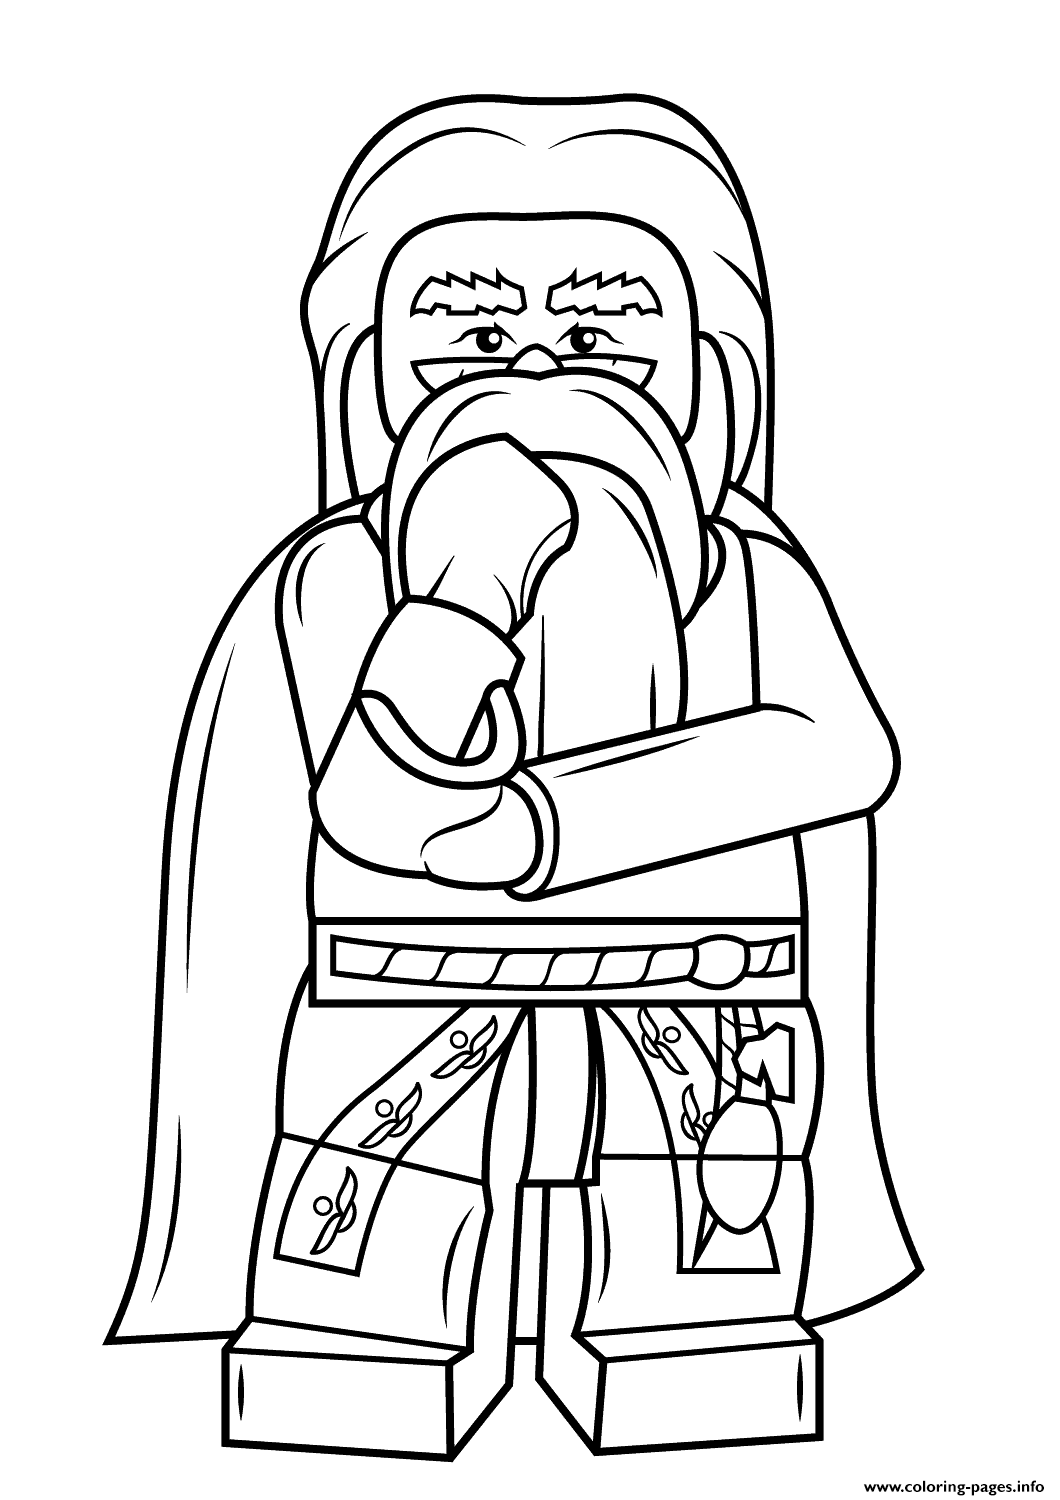 Lego Albus Dumbledore Harry Potter Coloring Pages Printable